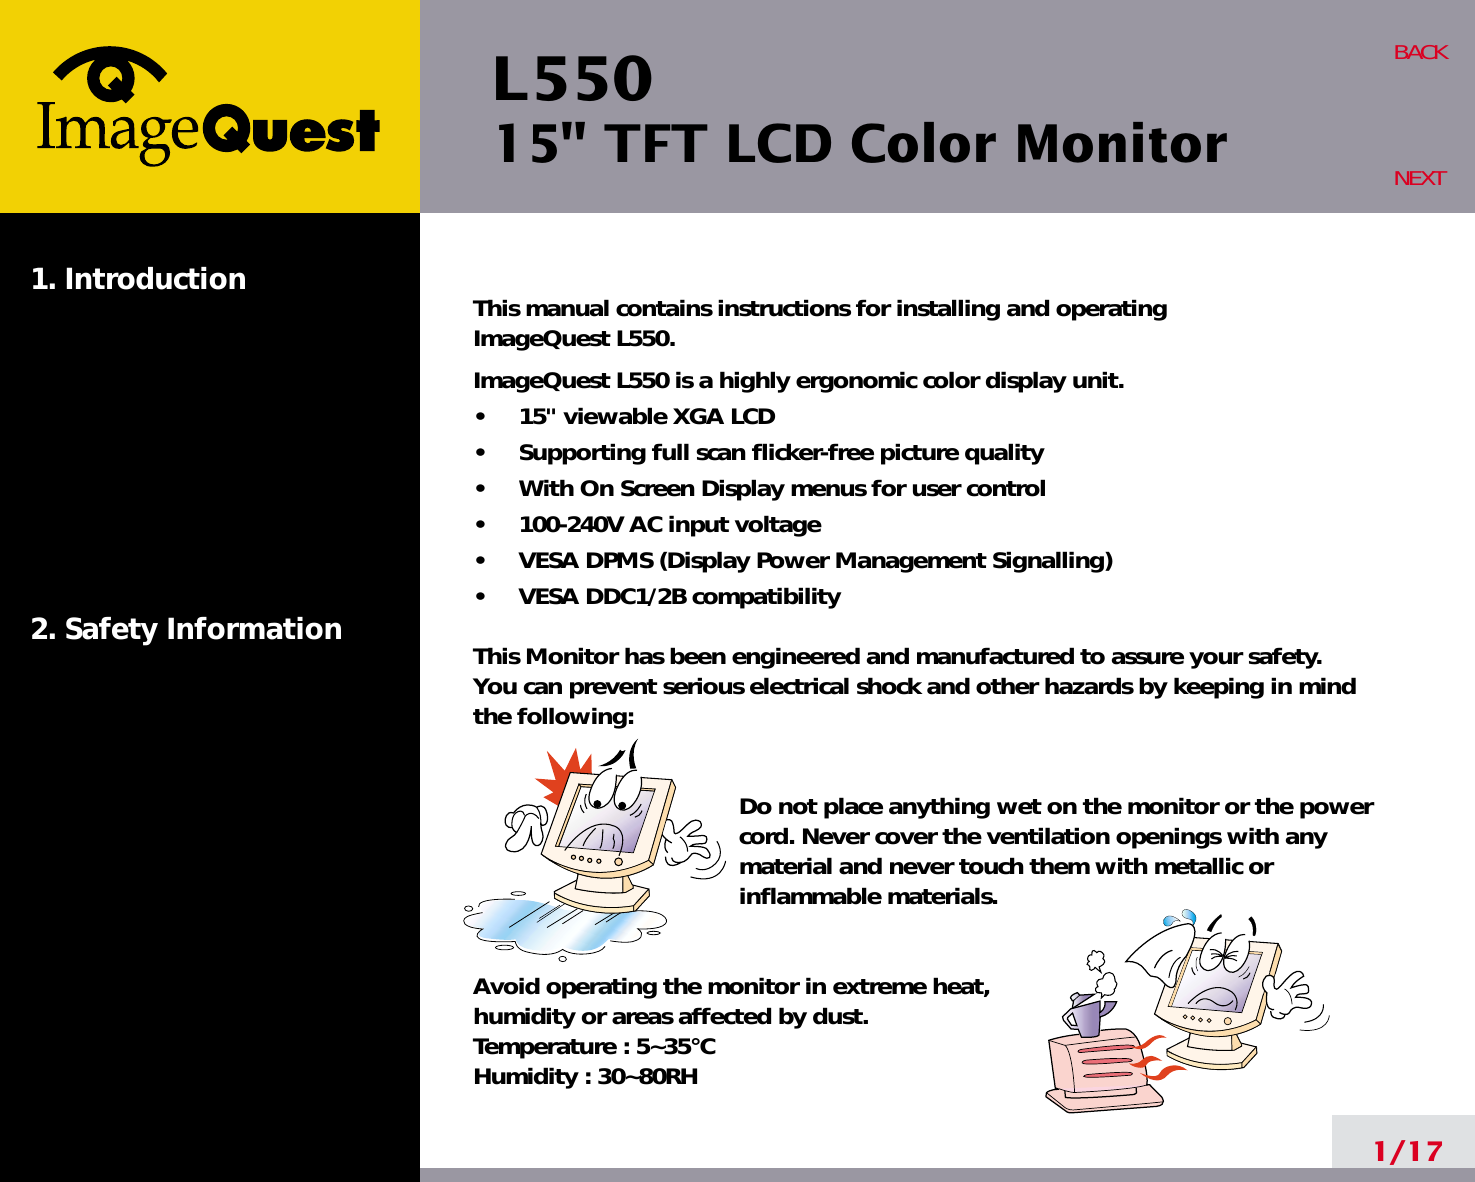 L550 15&quot; TFT LCD Color Monitor1. Introduction2. Safety Information1/17BACKNEXTThis manual contains instructions for installing and operating ImageQuest L550 .ImageQuest L550 is a highly ergonomic color display unit.•     15&quot; viewable XGA LCD•     Supporting full scan flicker-free picture quality•     With On Screen Display menus for user control•     100-240V AC input voltage•     VESA DPMS (Display Power Management Signalling)•     VESA DDC1/2B compatibilityThis Monitor has been engineered and manufactured to assure your safety. You can prevent serious electrical shock and other hazards by keeping in mind the following:Do not place anything wet on the monitor or the powercord. Never cover the ventilation openings with anymaterial and never touch them with metallic or inflammable materials.Avoid operating the monitor in extreme heat, humidity or areas affected by dust. Temperature : 5~35°CHumidity : 30~80RH 